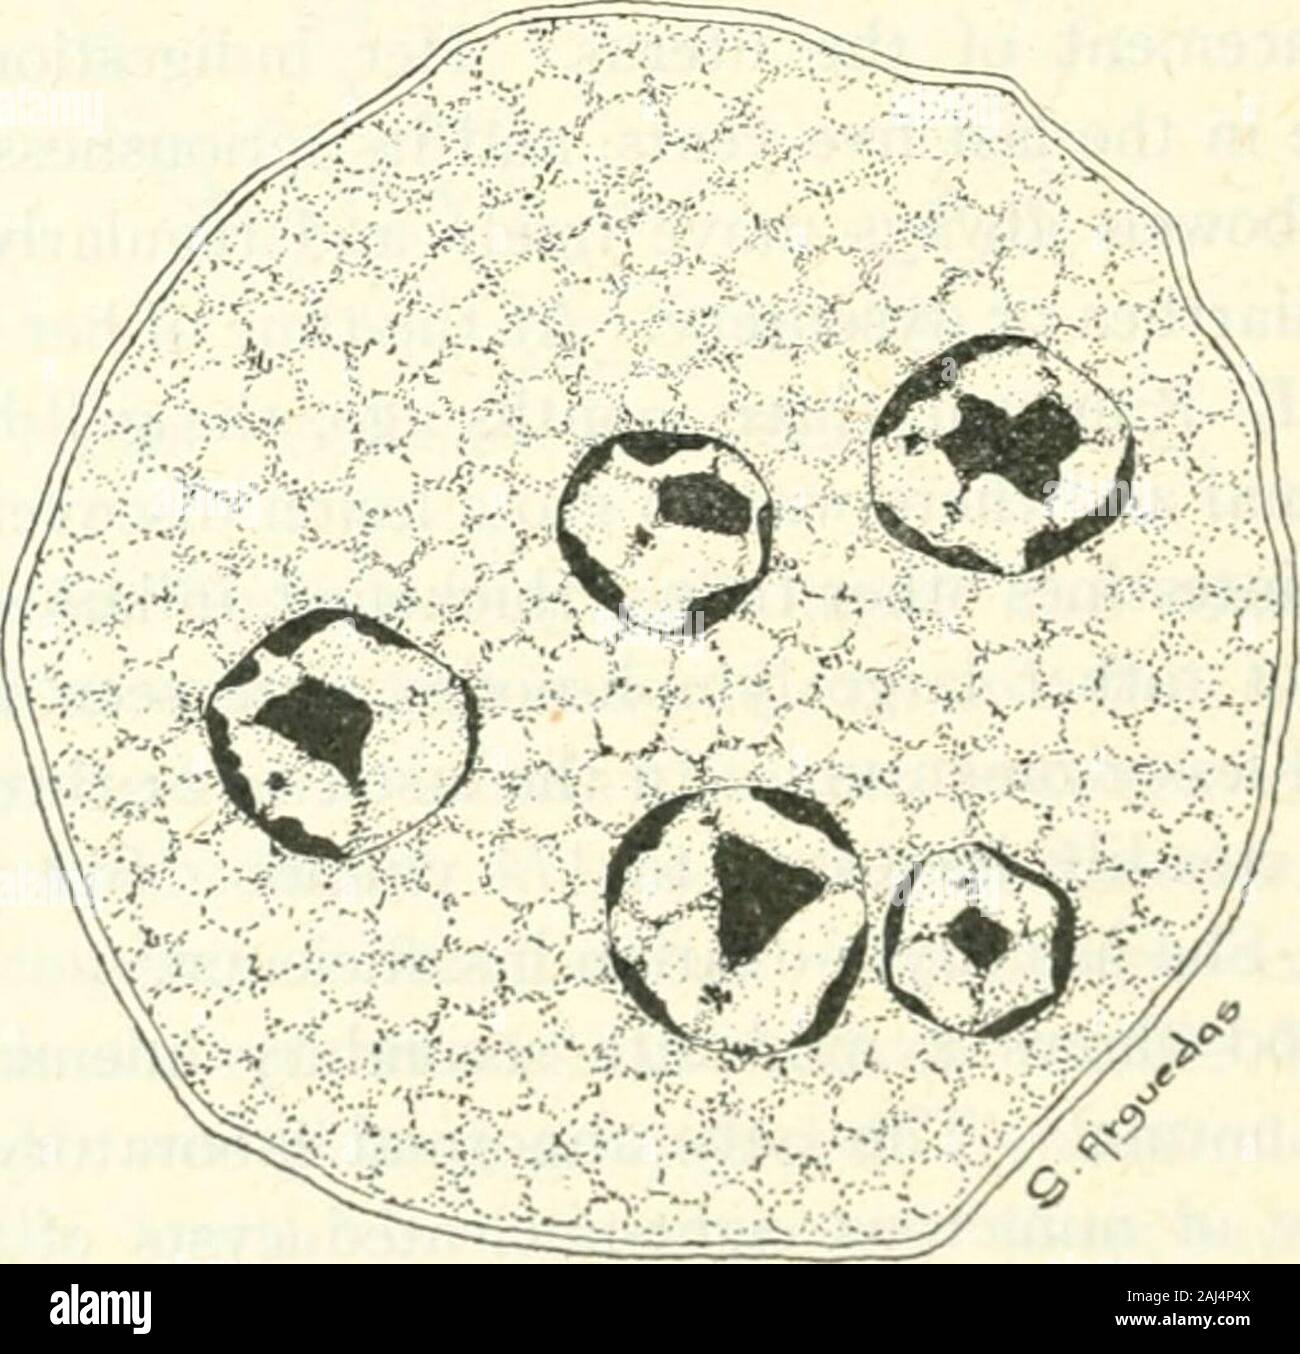 The Medical clinics of North America . Fig. 99.—Entamoeba coli, motile form.. Fig. 100.—Entamoeba coli, encysted form. whether this is a new species, hitherto confused with P^ntamcebacoli, will have to be made by the systematic protozoologist. At INTESTINAL PROTOZOA IN CLINICAL PRACTICE 413 present we classify them as E. coli of the Councilmania type.The variety is easily recognized and differentiated, but furtherstudy and confirmation is needed to establish its biologic separa-tion from E. coli. We have had no difficulty in curing thisspecies of infection with the same treatment used for E. h Stock Photo